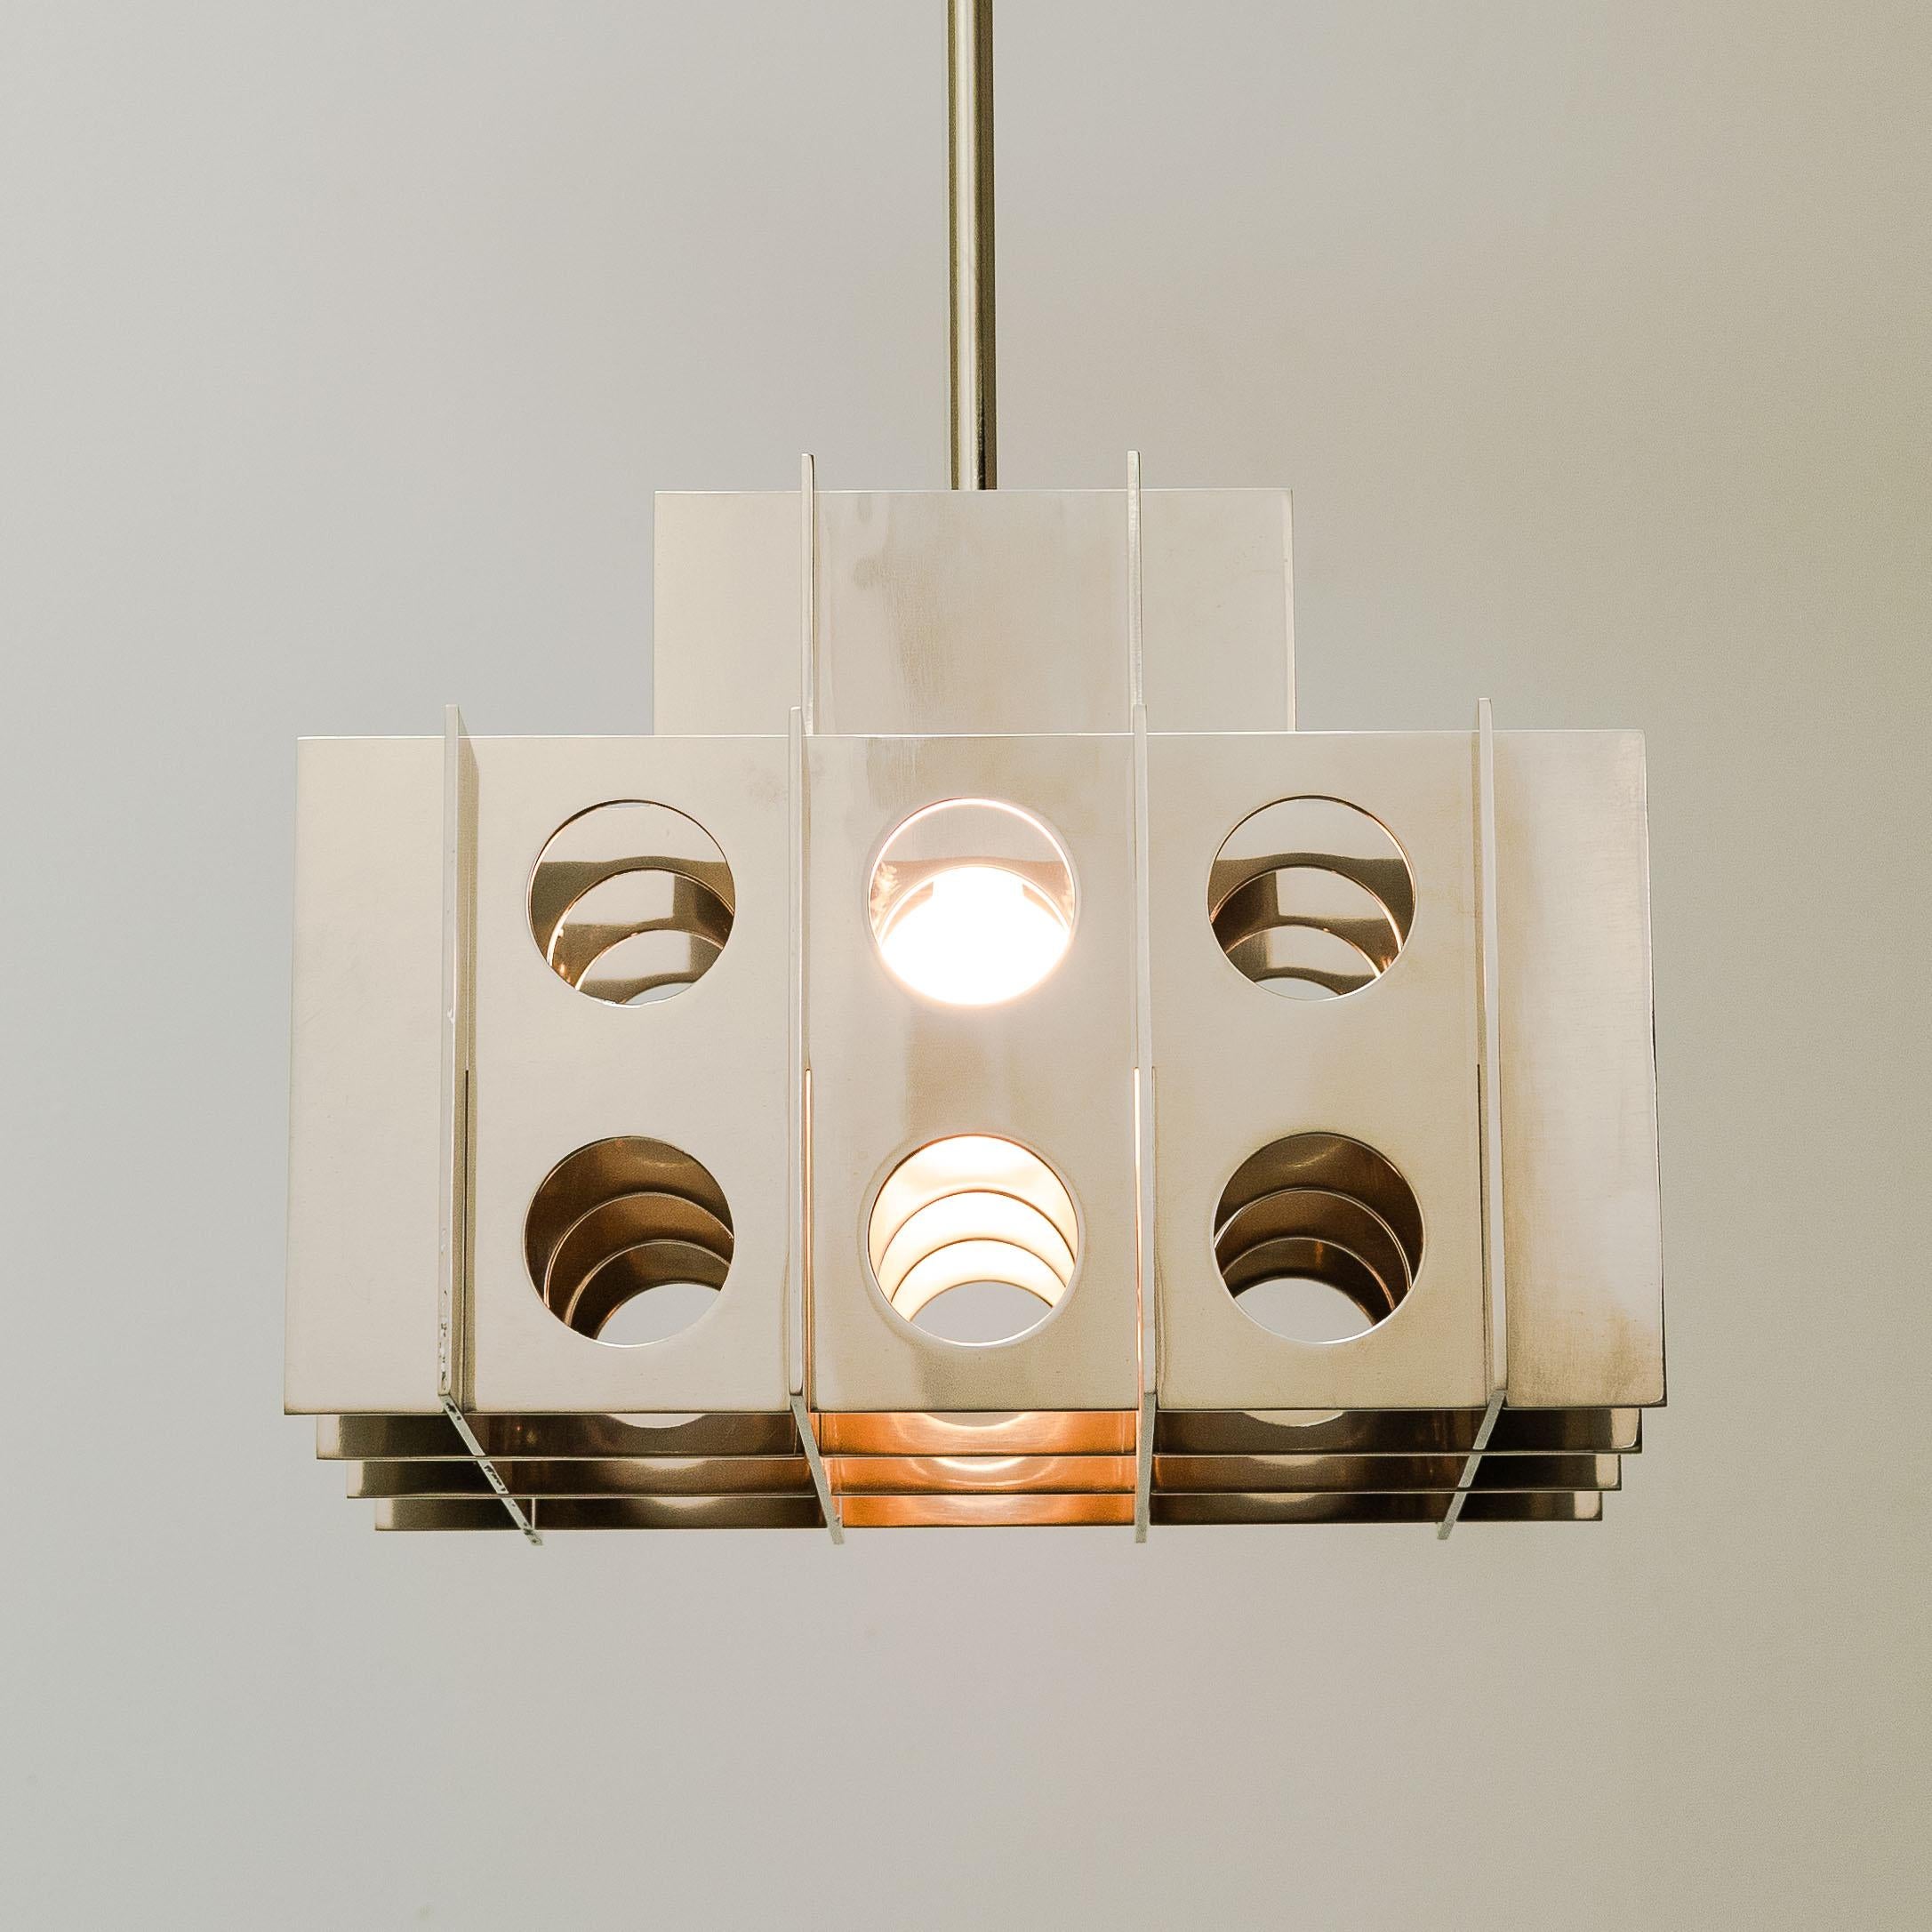 Contemporary Tenfold Pendant 3TA 32inch, Waxed Aluminum, Geometric, Brutalist Ceiling Light For Sale